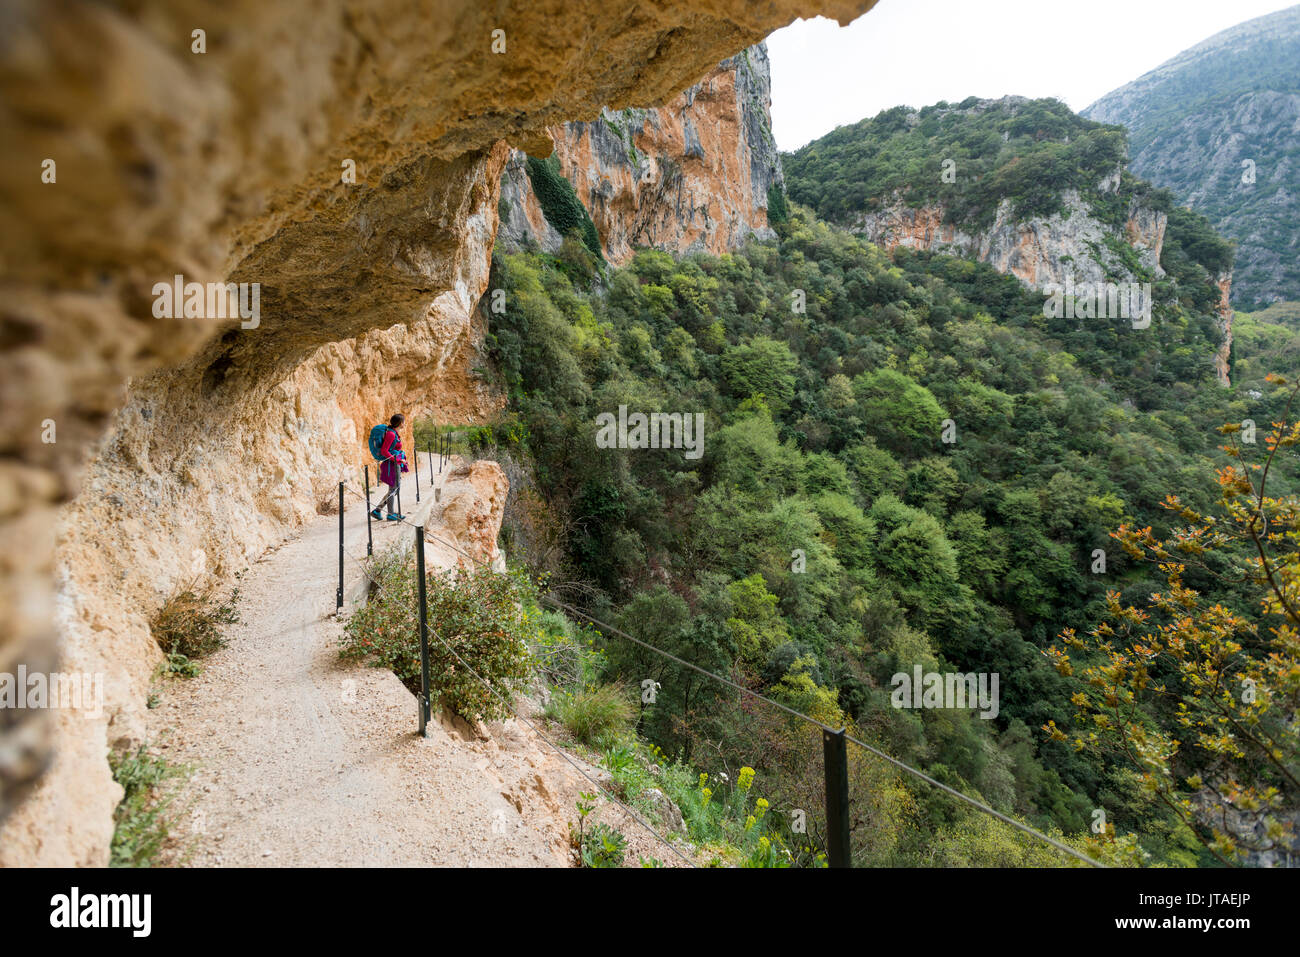 A woman hiking in the Taygetos Mountains above Mystras in the Peloponnese, Greece, Europe Stock Photo